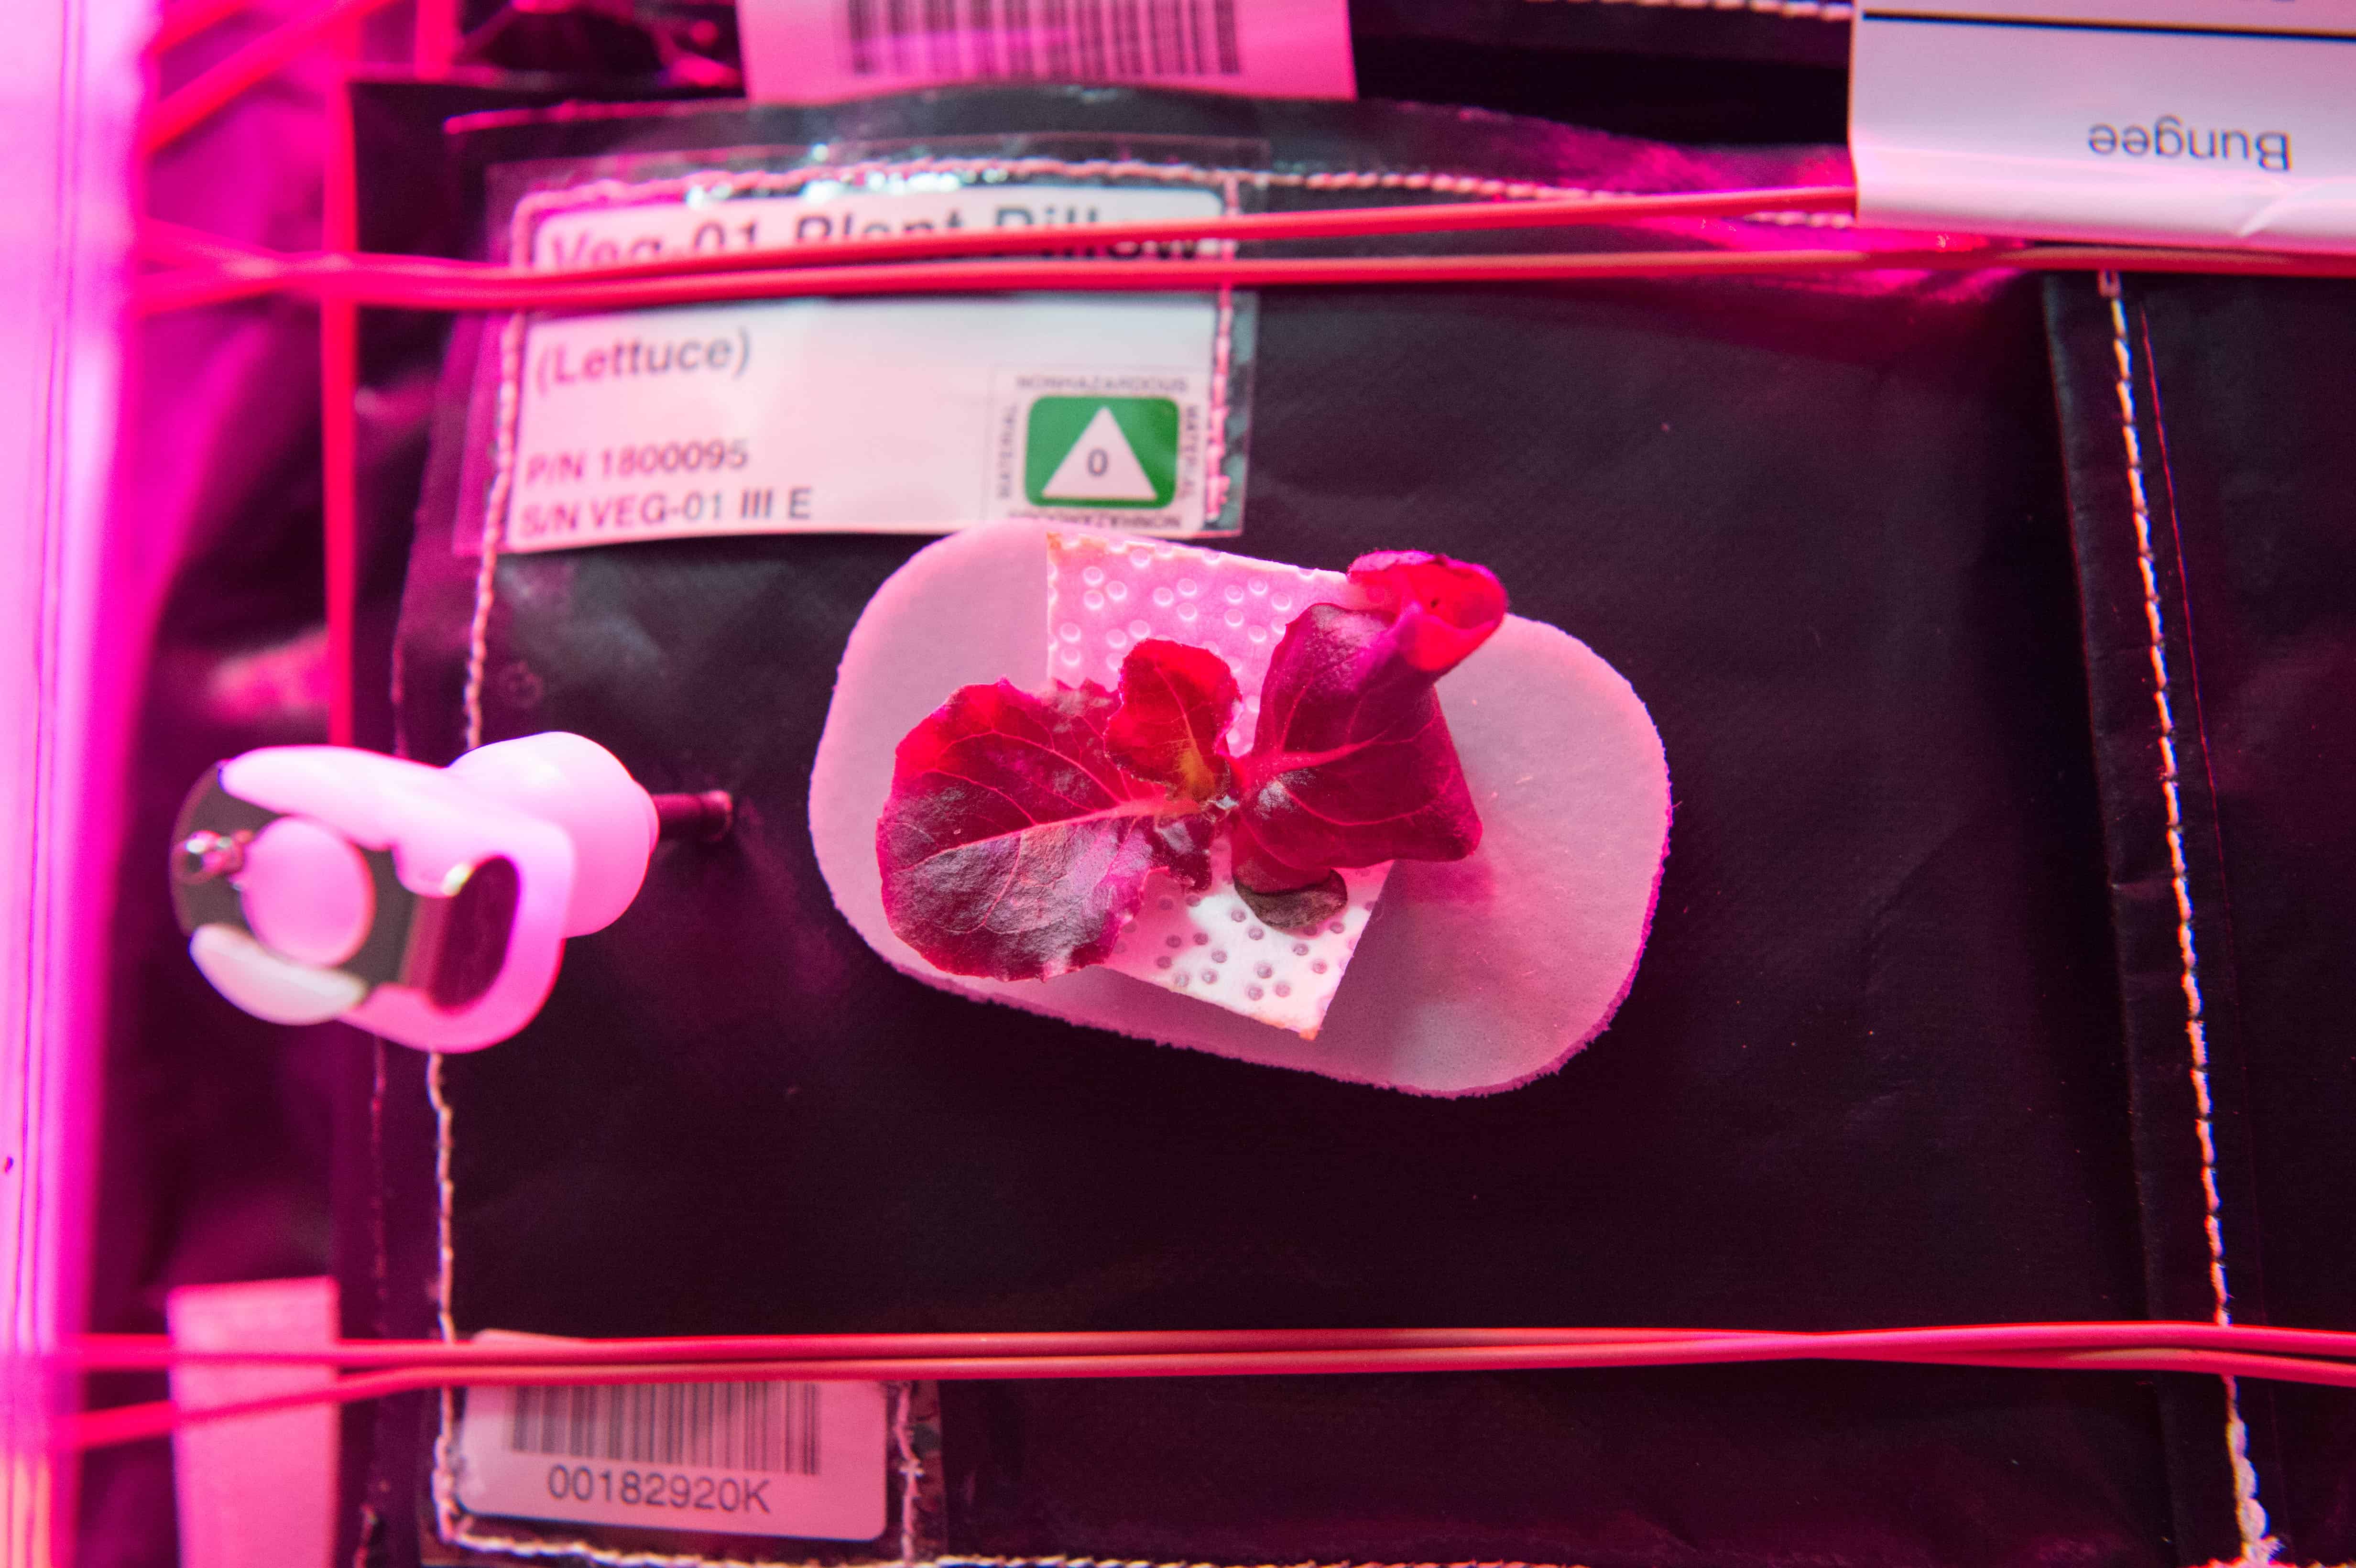 This NASA handout photo released August 5, 2015, taken by Astronaut Scott Kelly on the International Space Station shows lettuce growing during the VEGGIE hardware validation test. VEGGIE provides lighting and nutrient supply for plants in the form of a low-cost growth chamber and planting 